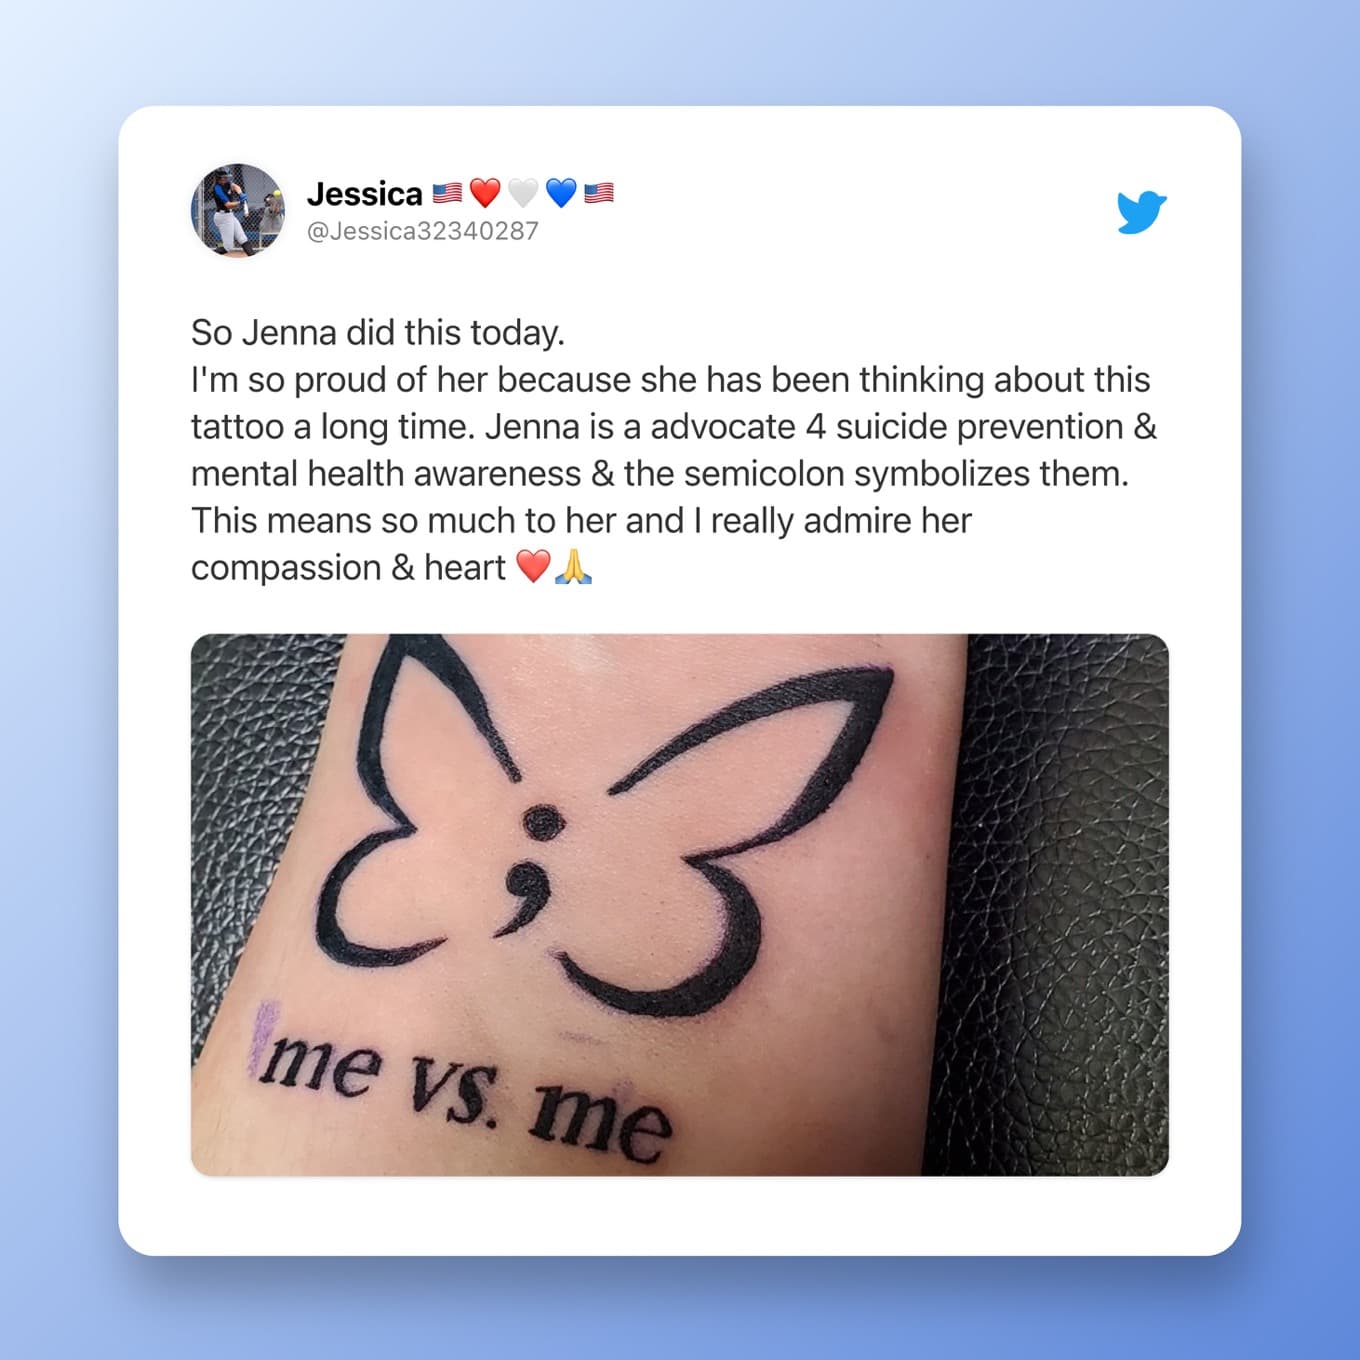 So Jenna did this today.  I'm so proud of her because she has been thinking about this tattoo a long time. Jenna is a advocate 4 suicide prevention & mental health awareness & the semicolon symbolizes them. This means so much to her and I really admire her compassion & heart ❤🙏